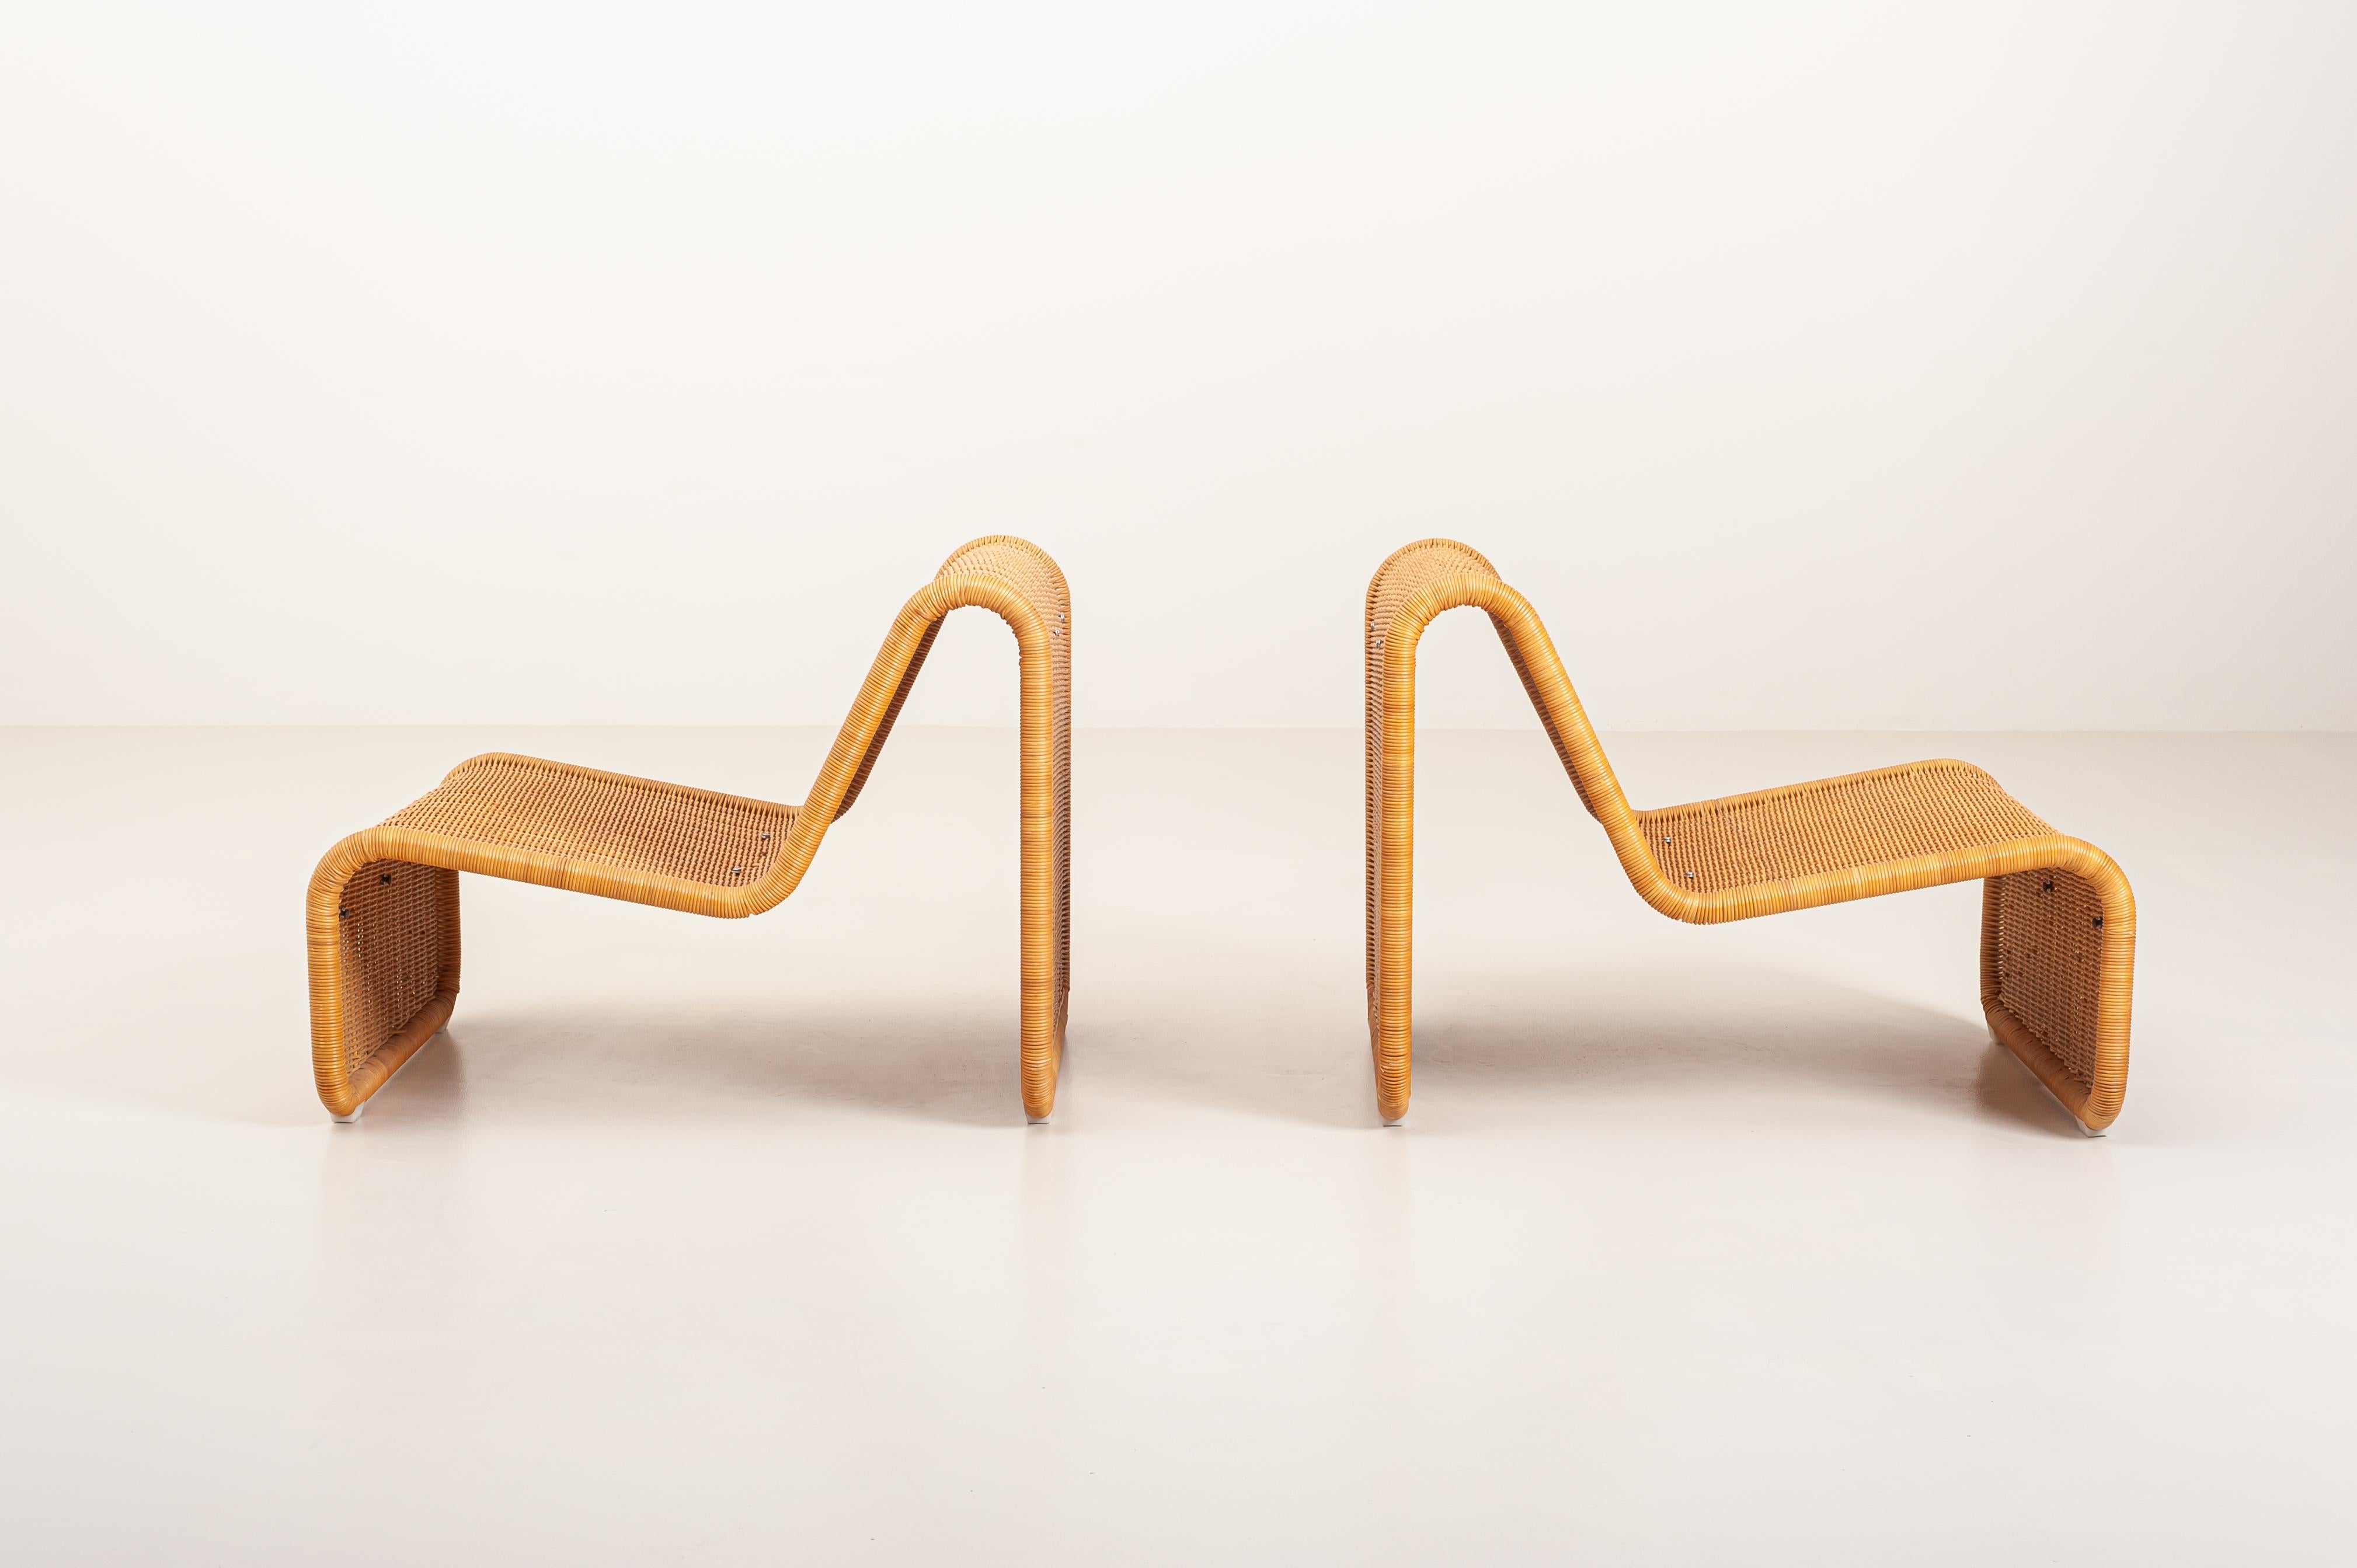 Set of two authentic P3 lounge chairs designed in the '60s by Tito Agnoli and produced in the late 1970s by Vittorio Bonacina.
Labelled with the manufacturer metal plaque and equipped with their original cushions, they are in almost perfect vintage